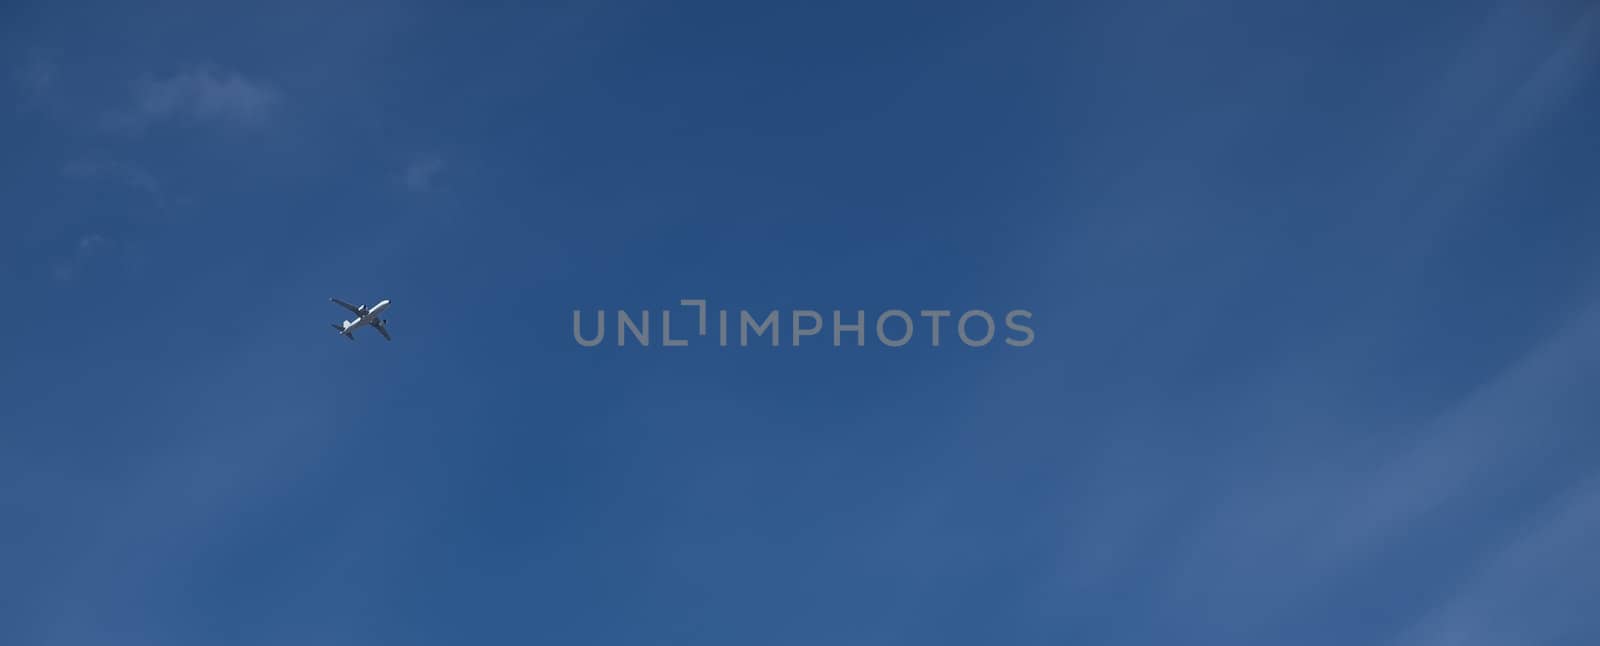 Conceptual image showing civil airliner over blue sky